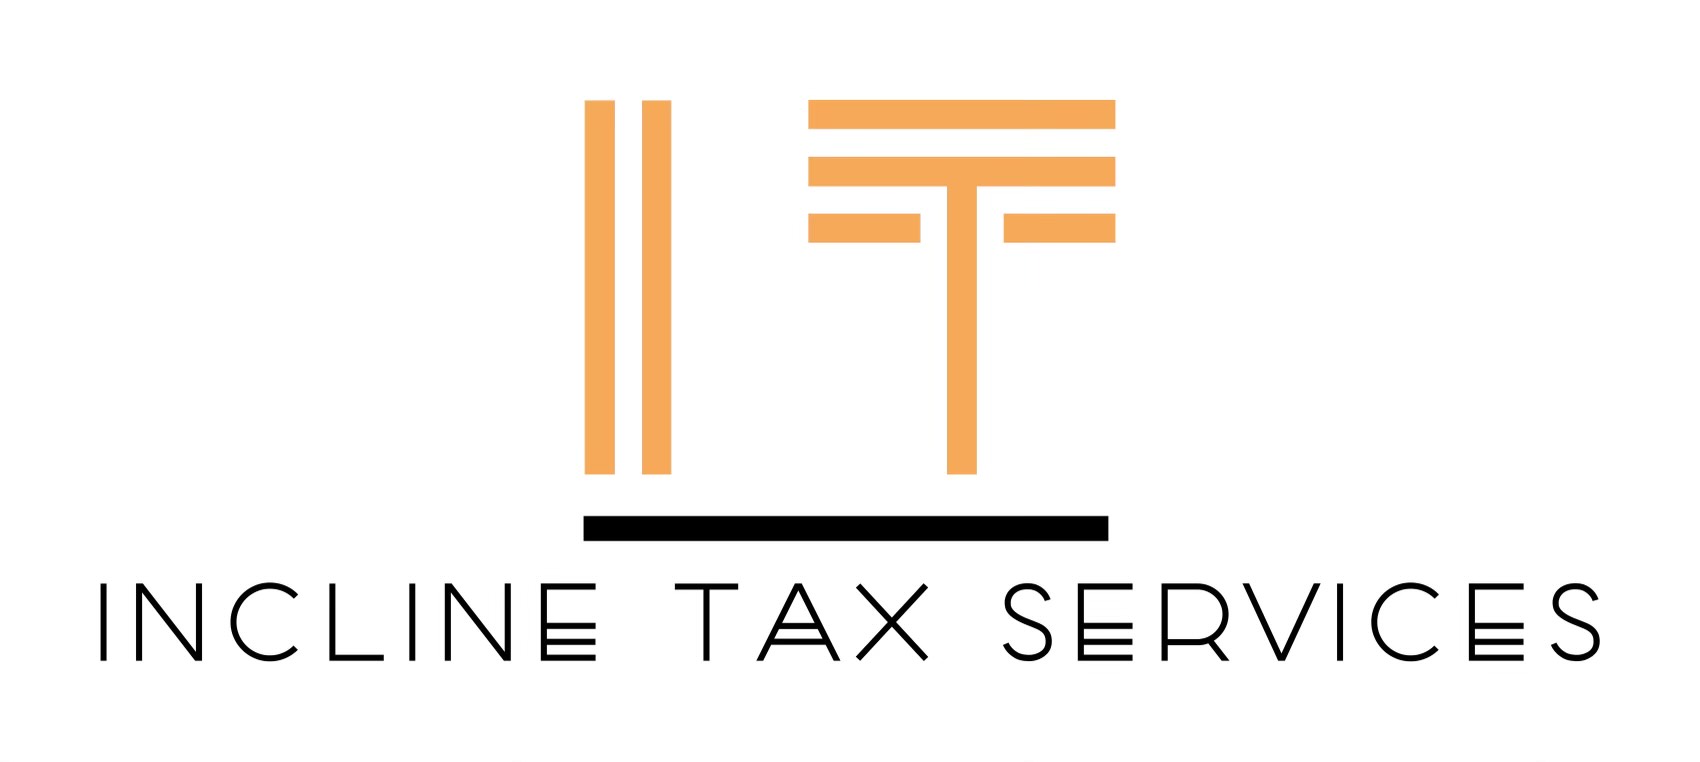 INCLINE TAX SERVICES